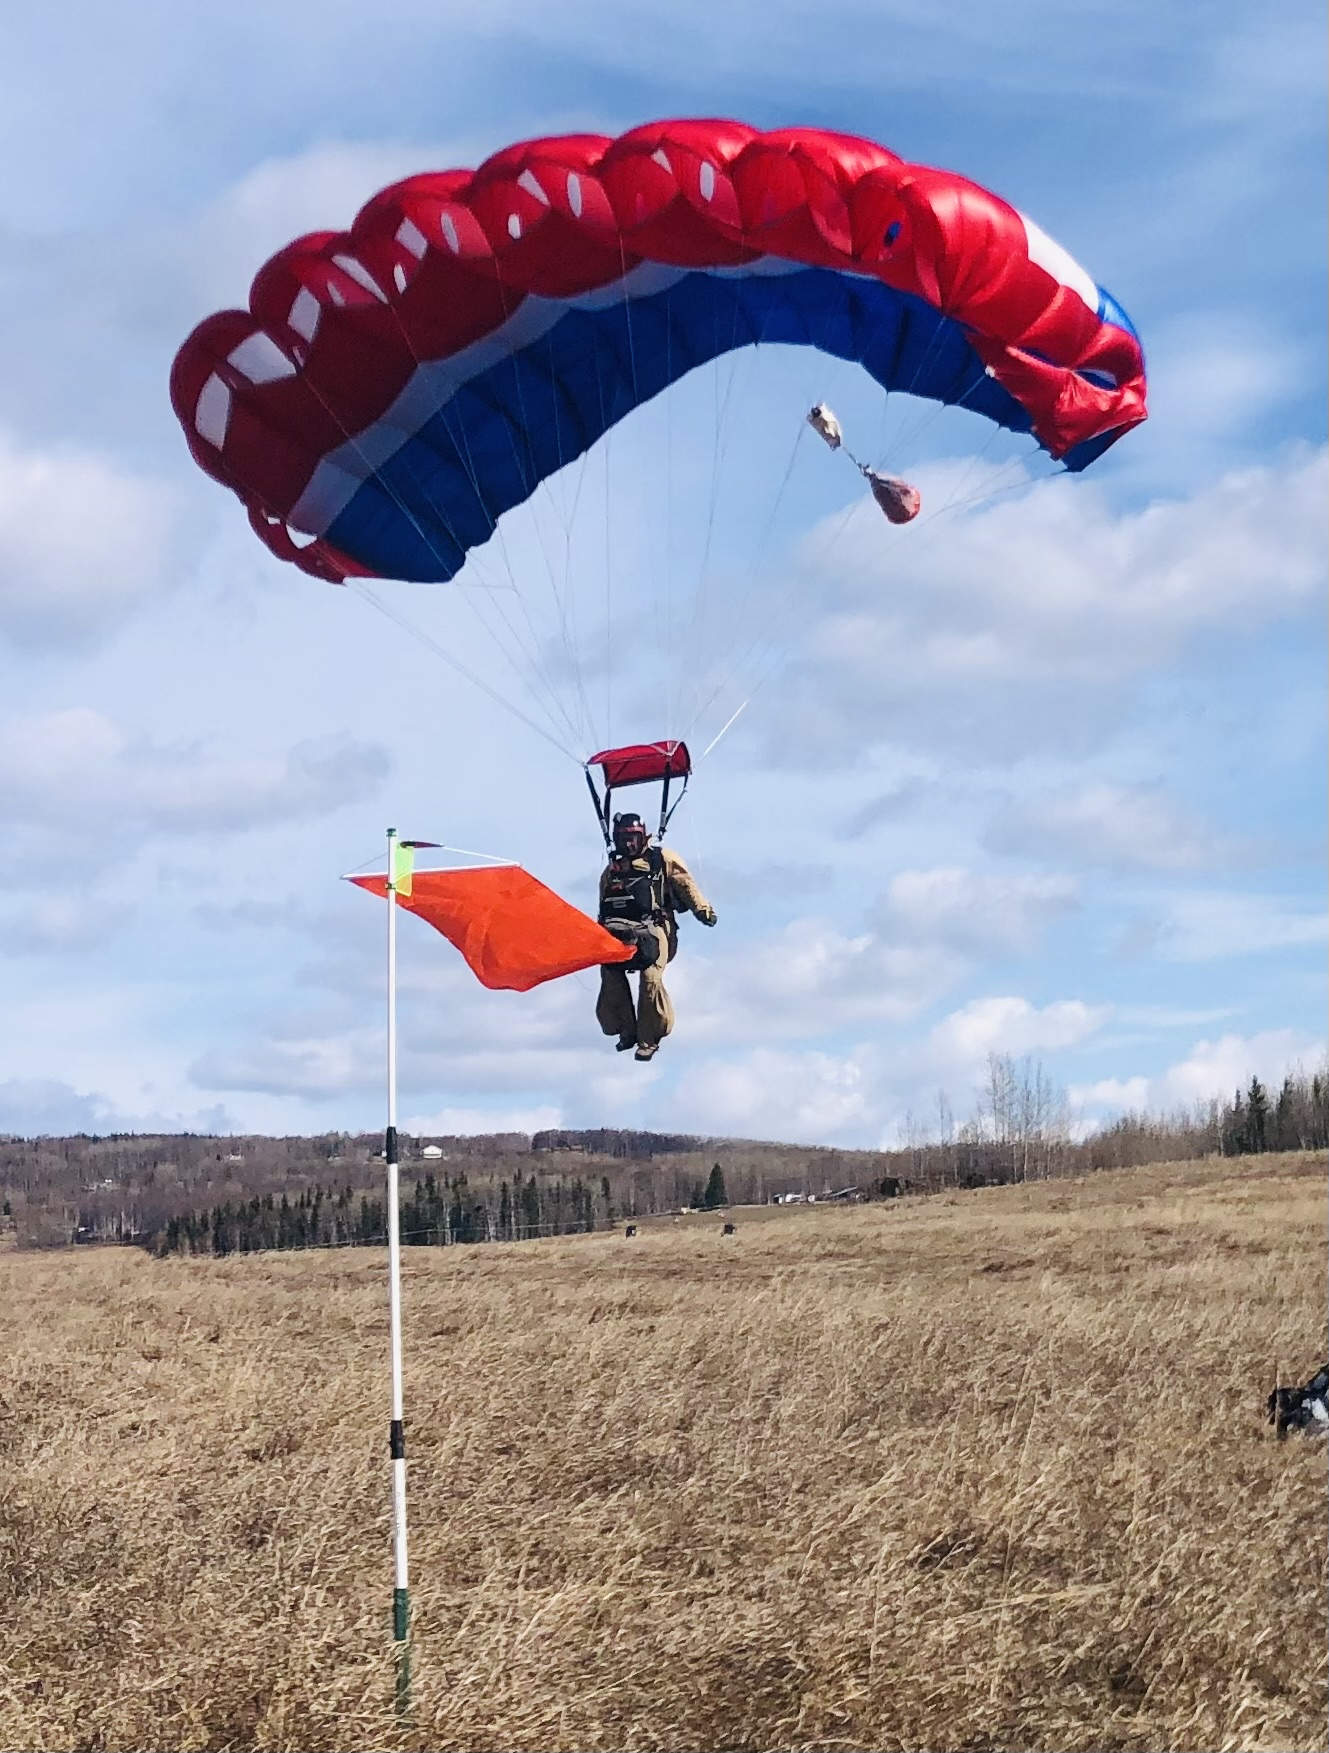 Windsock accuracy critical for parachute landings.